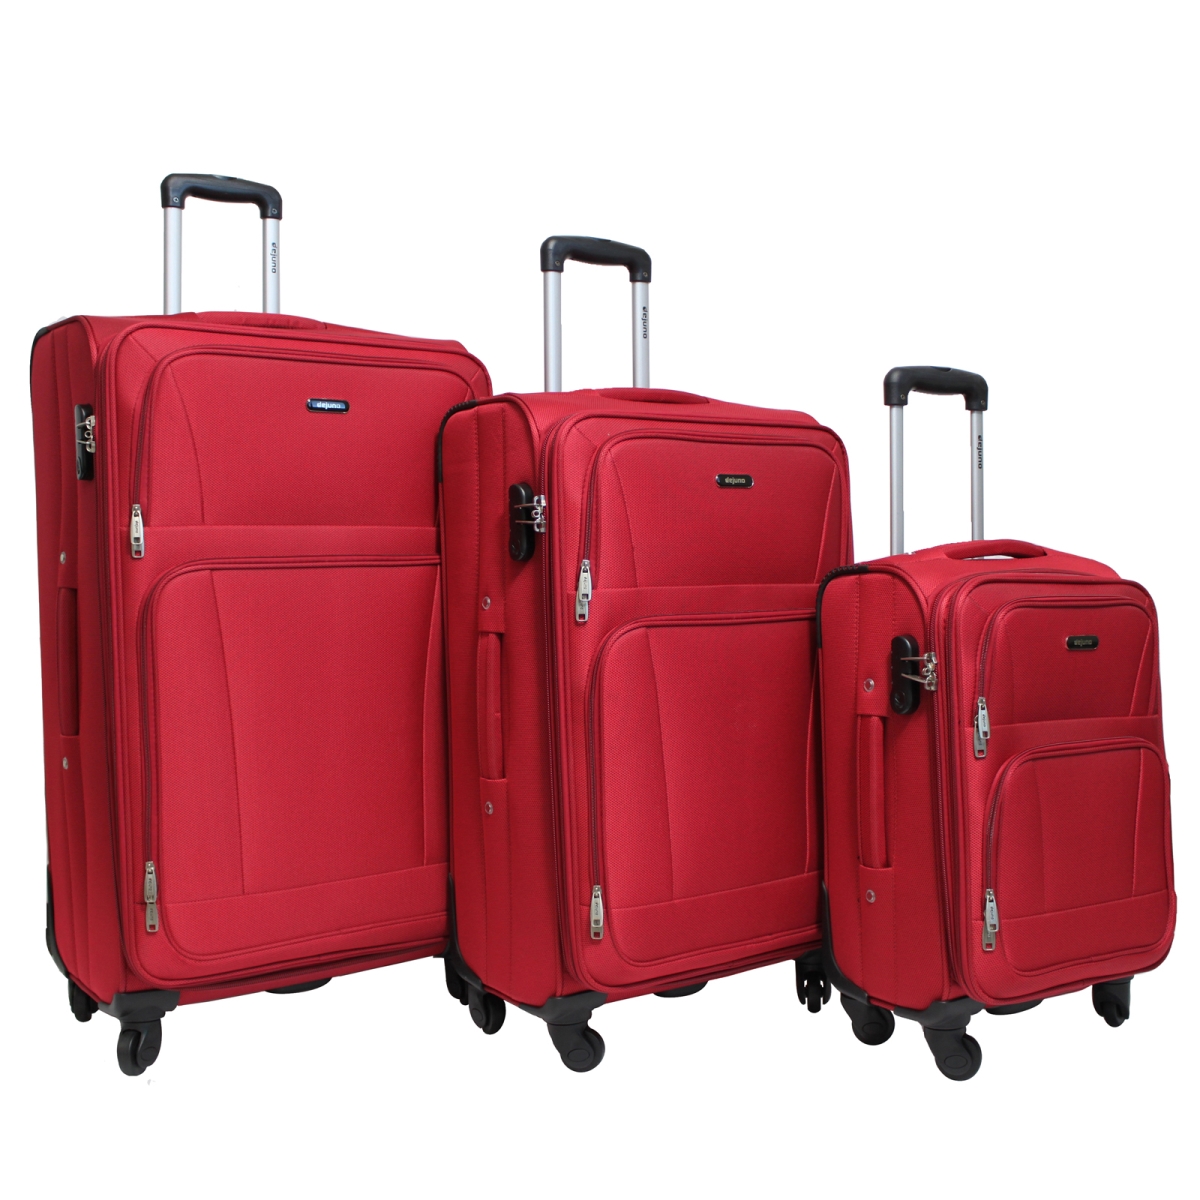 Dj-077-red The Escape Softside Lightweight Spinner Luggage Set - Red, 3 Piece